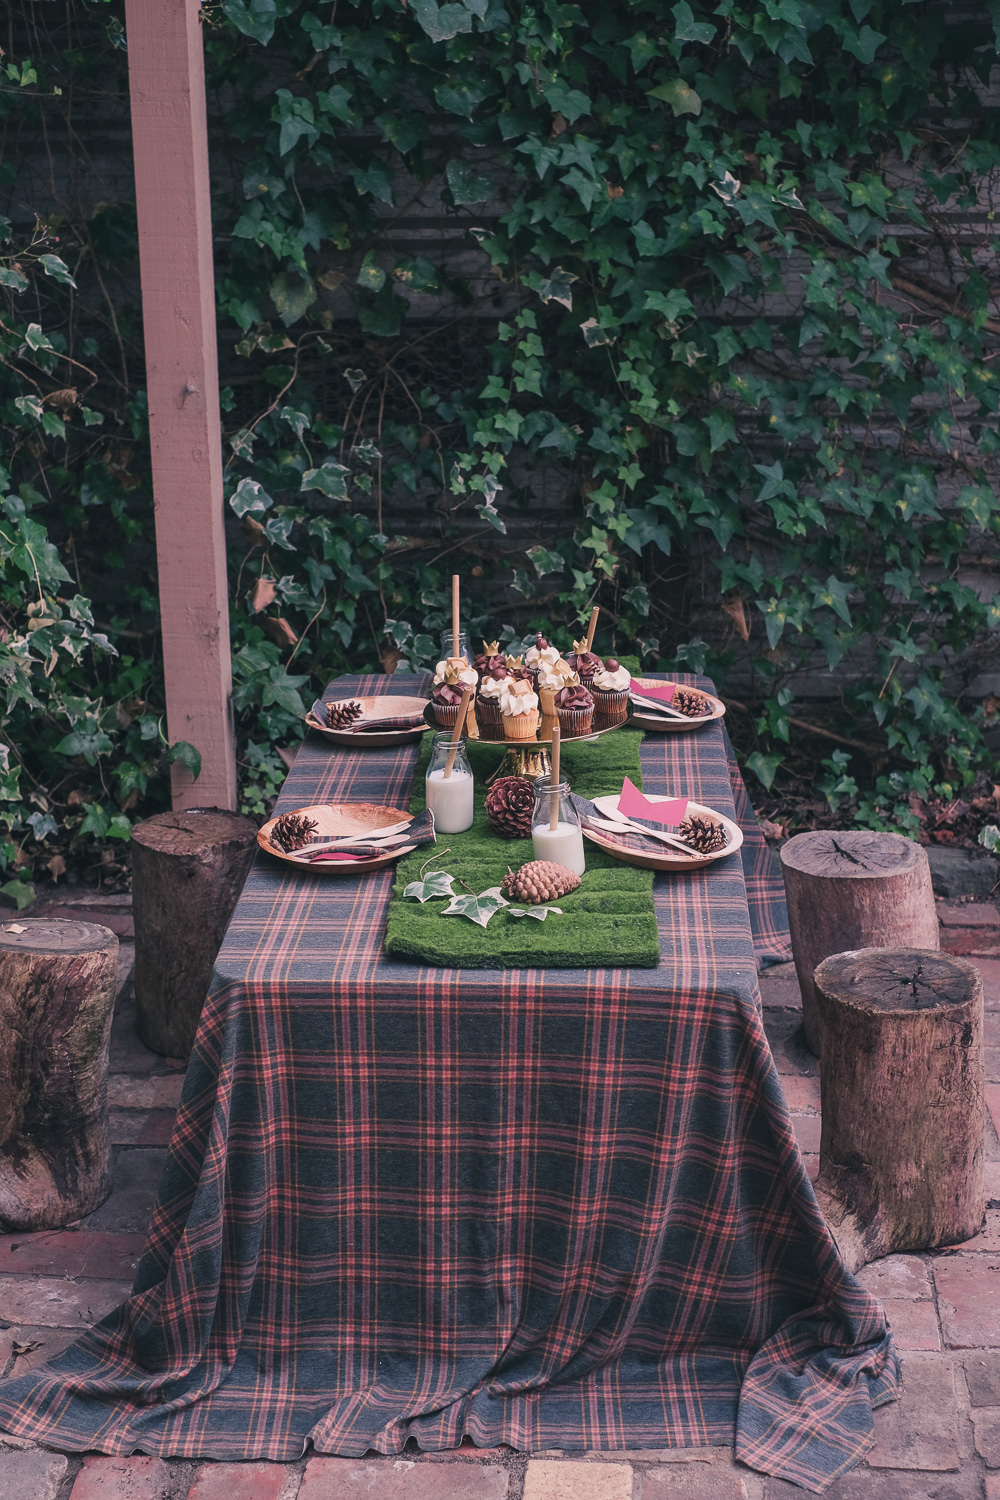 Where The Wild Things Arebirthday party tablescape with log seats and pinecones